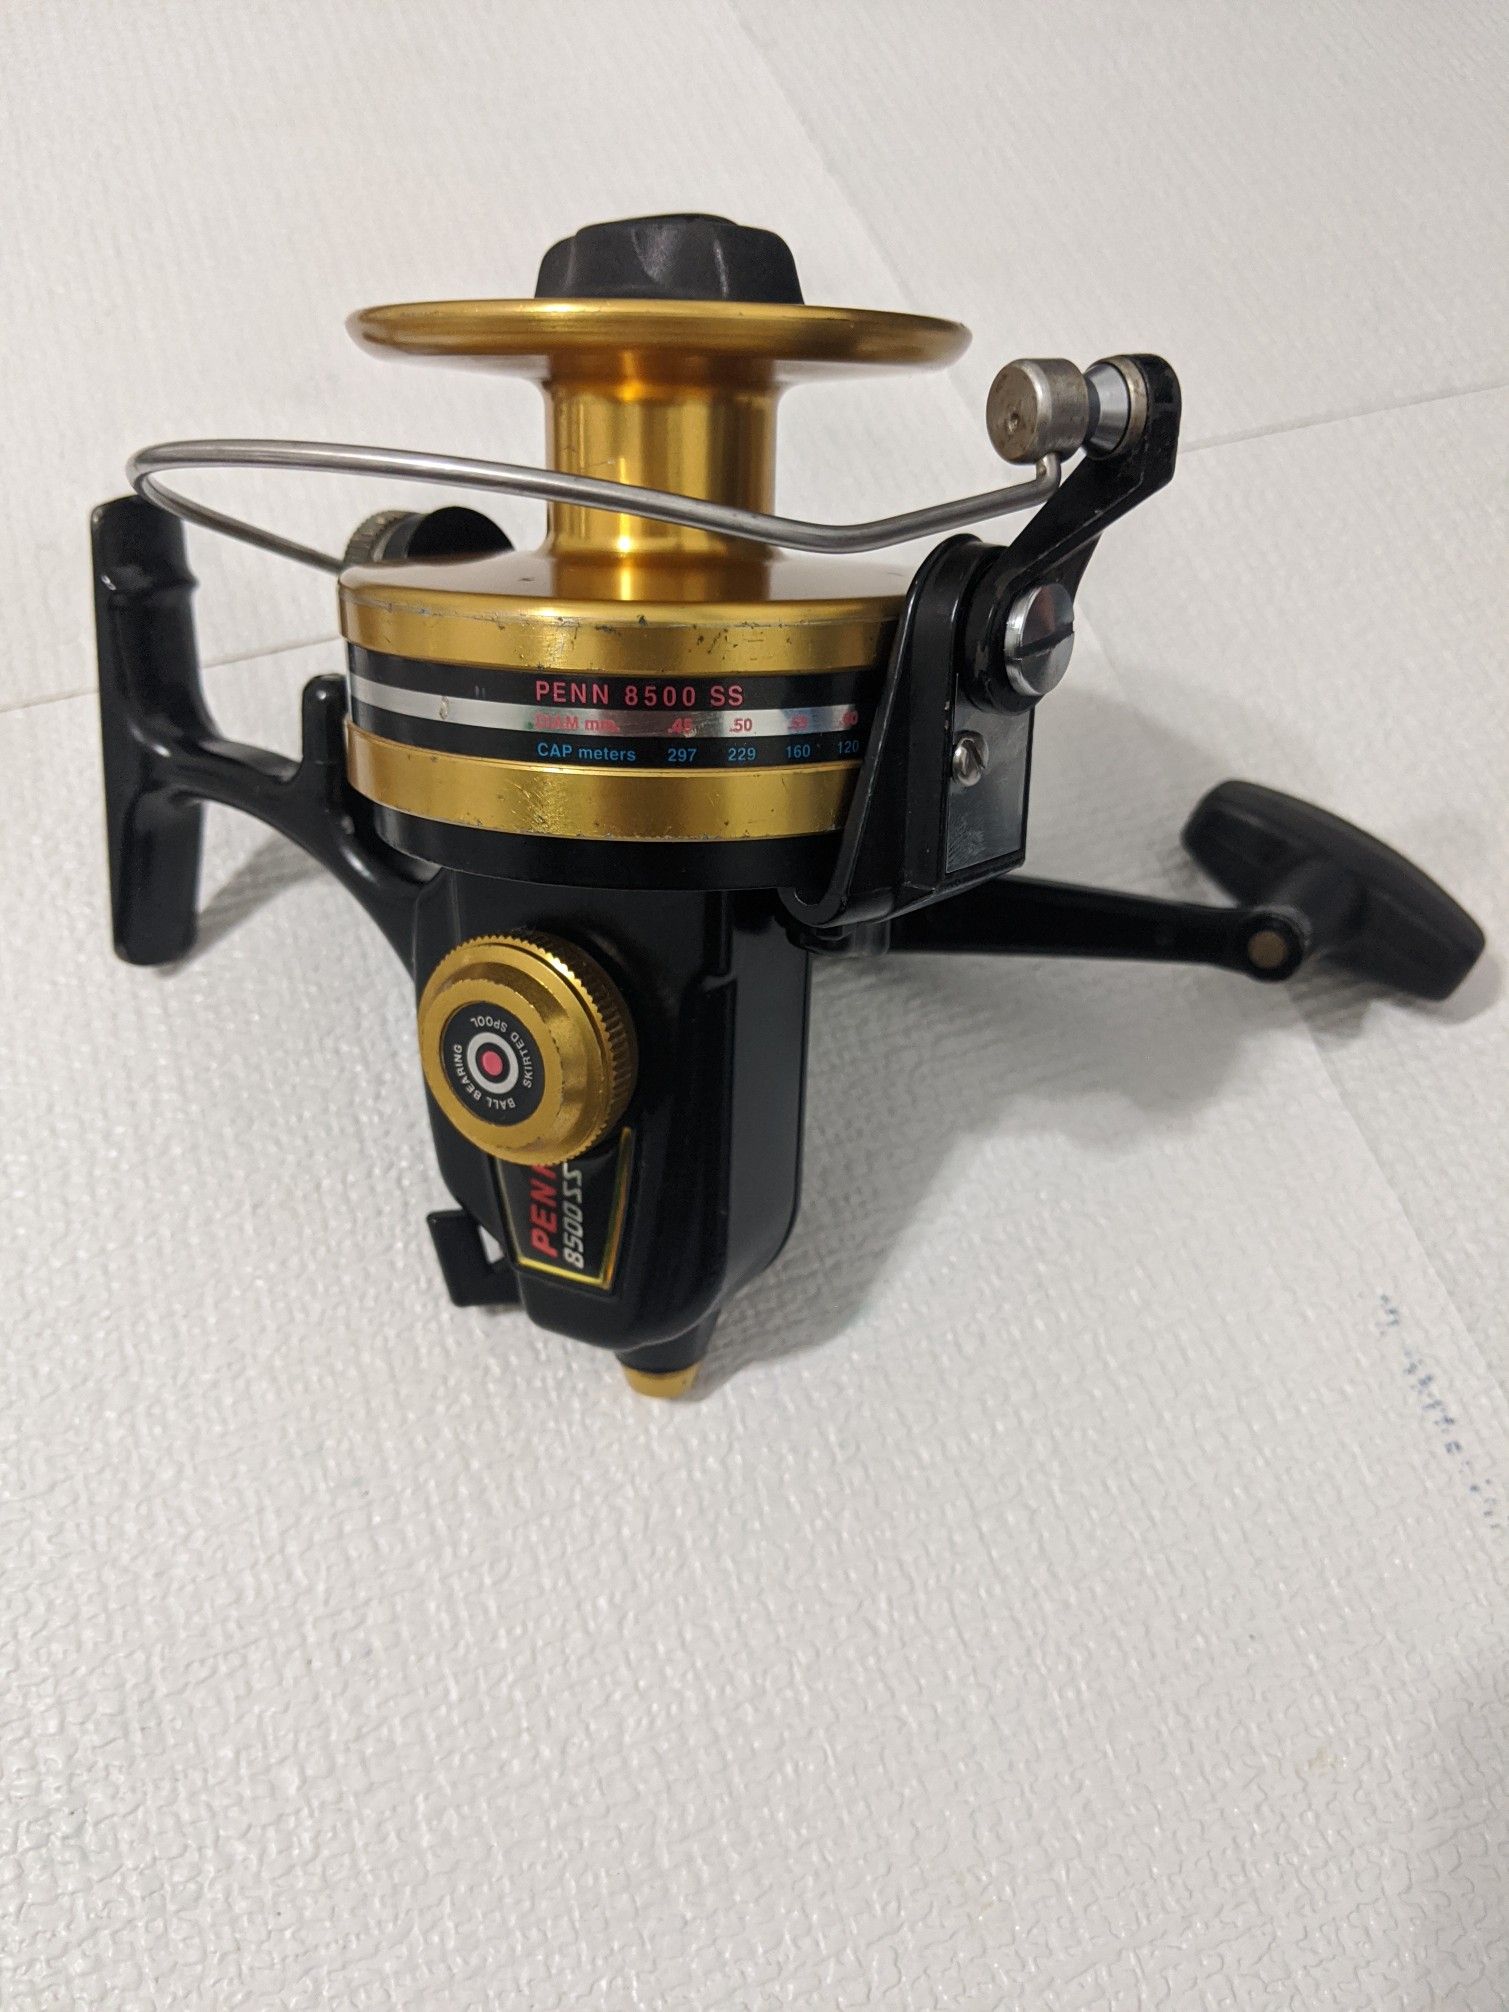 Serviced Penn 8500 SS Spinning Reel. Nice Condition. Ready for fishing.